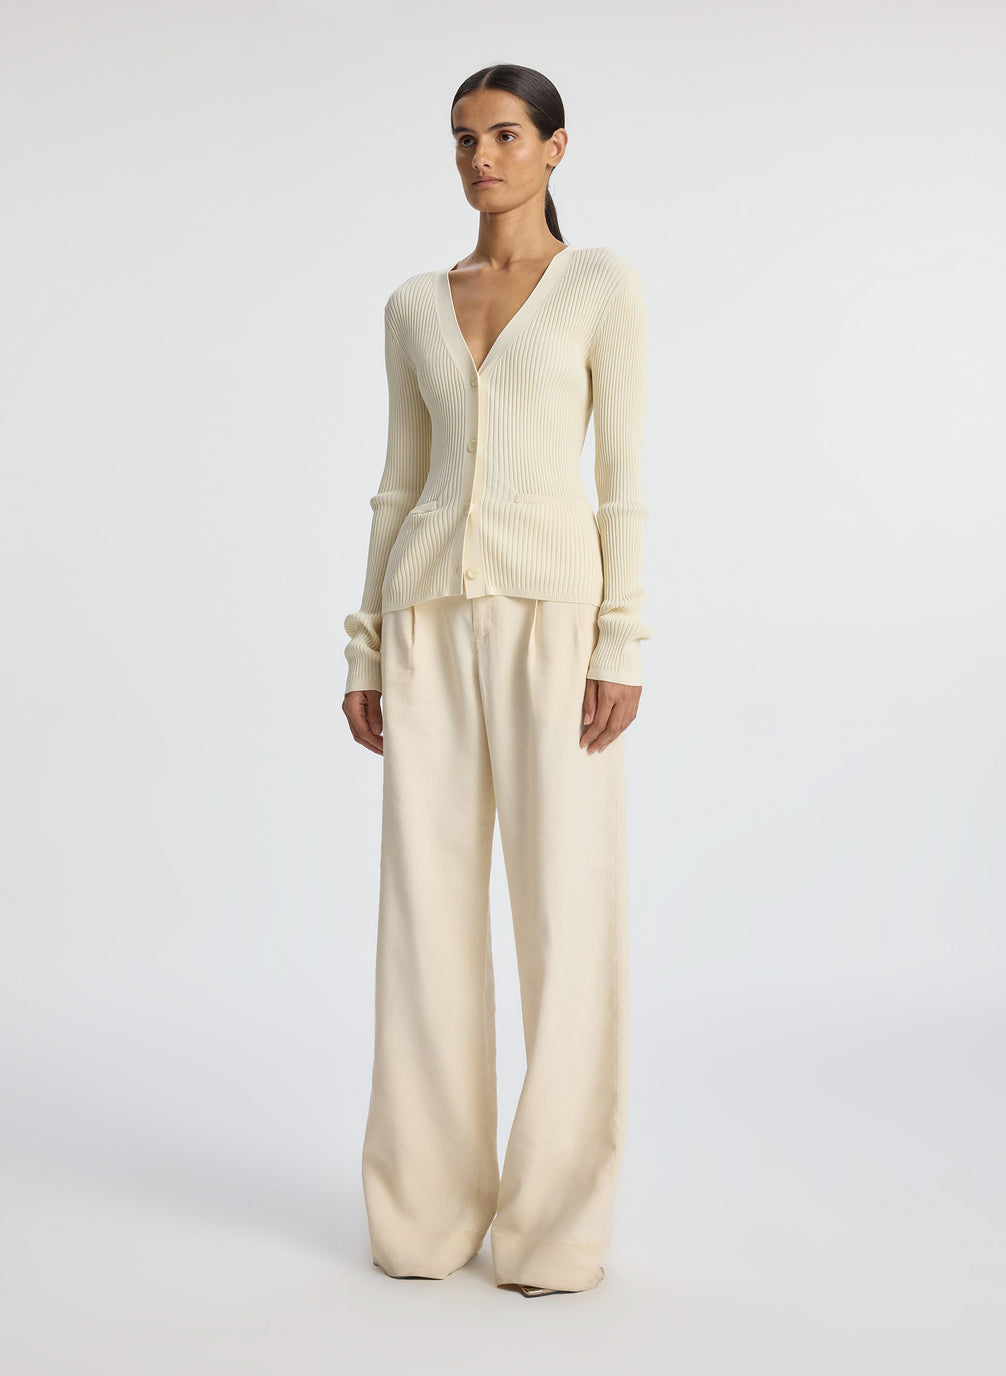 side view of woman wearing cream cardigan and beige pants